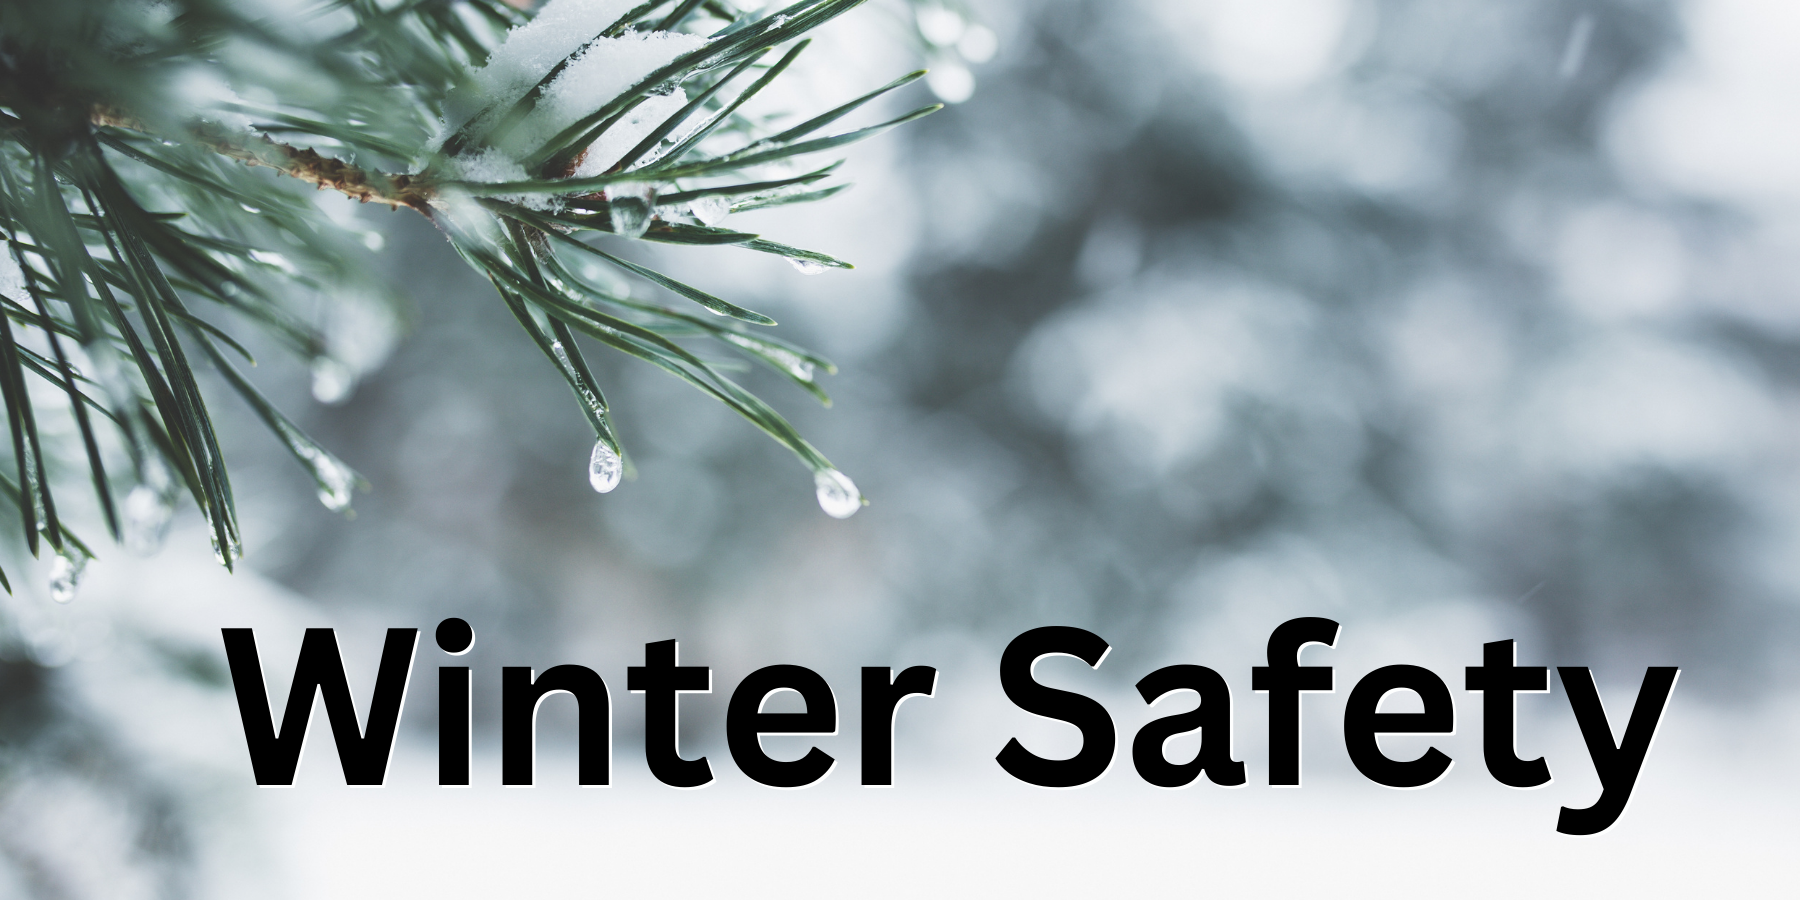 Slide about winter safety